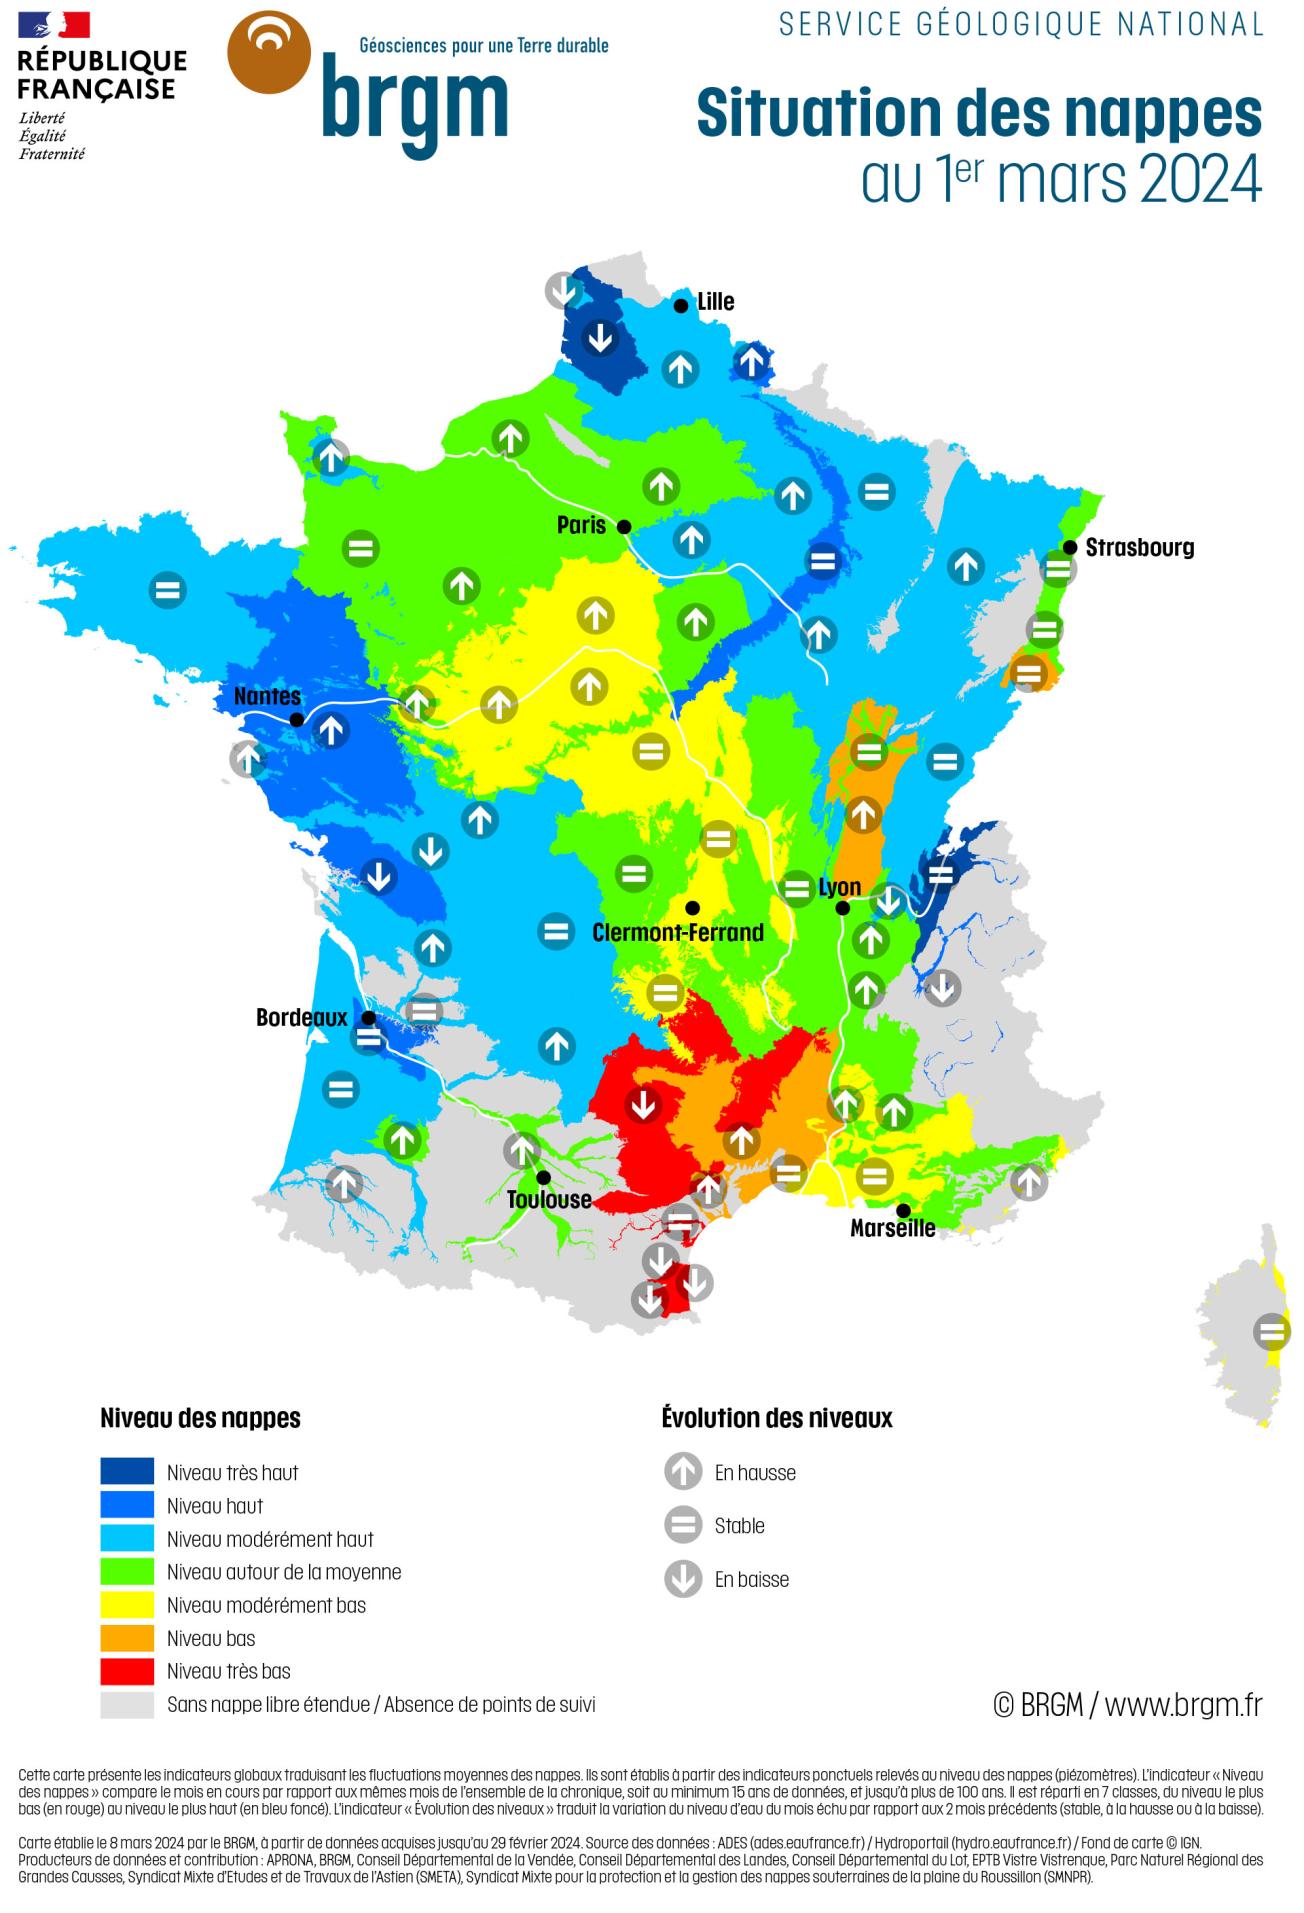 Map of aquifer levels in mainland France on 1 March 2024.